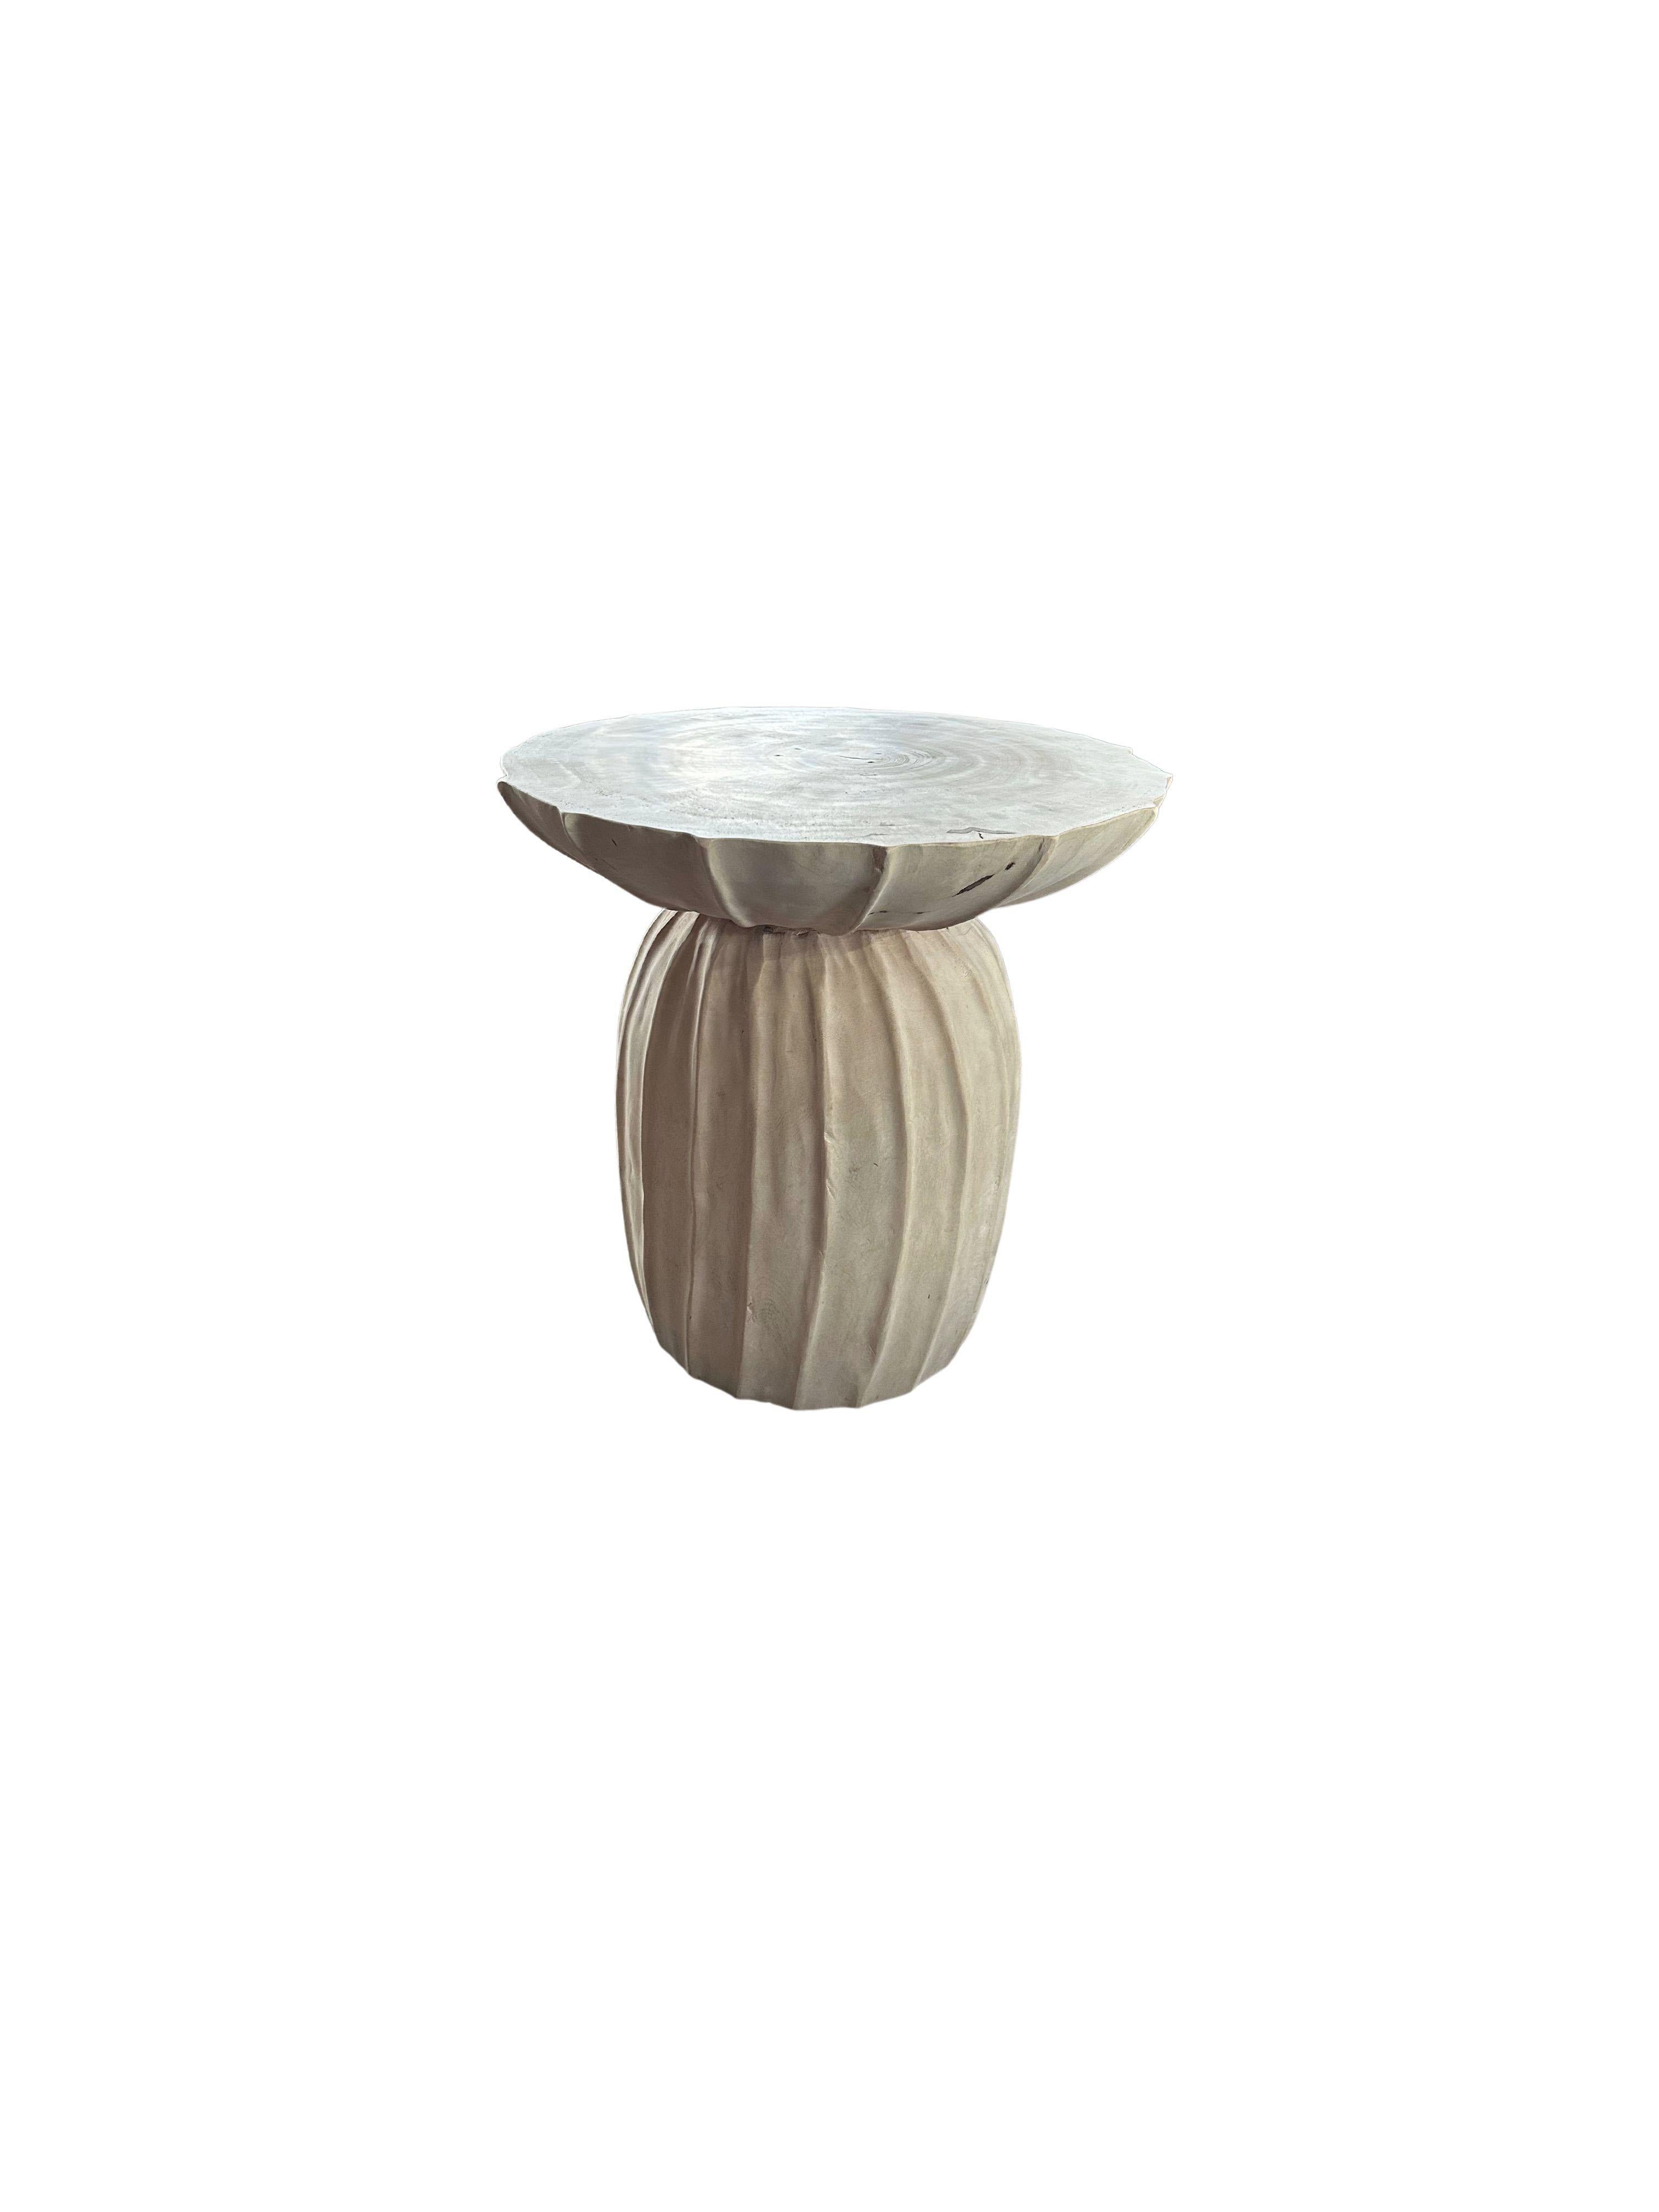 Organic Modern Sculptural Side Table Mango Wood Bleached Finish For Sale